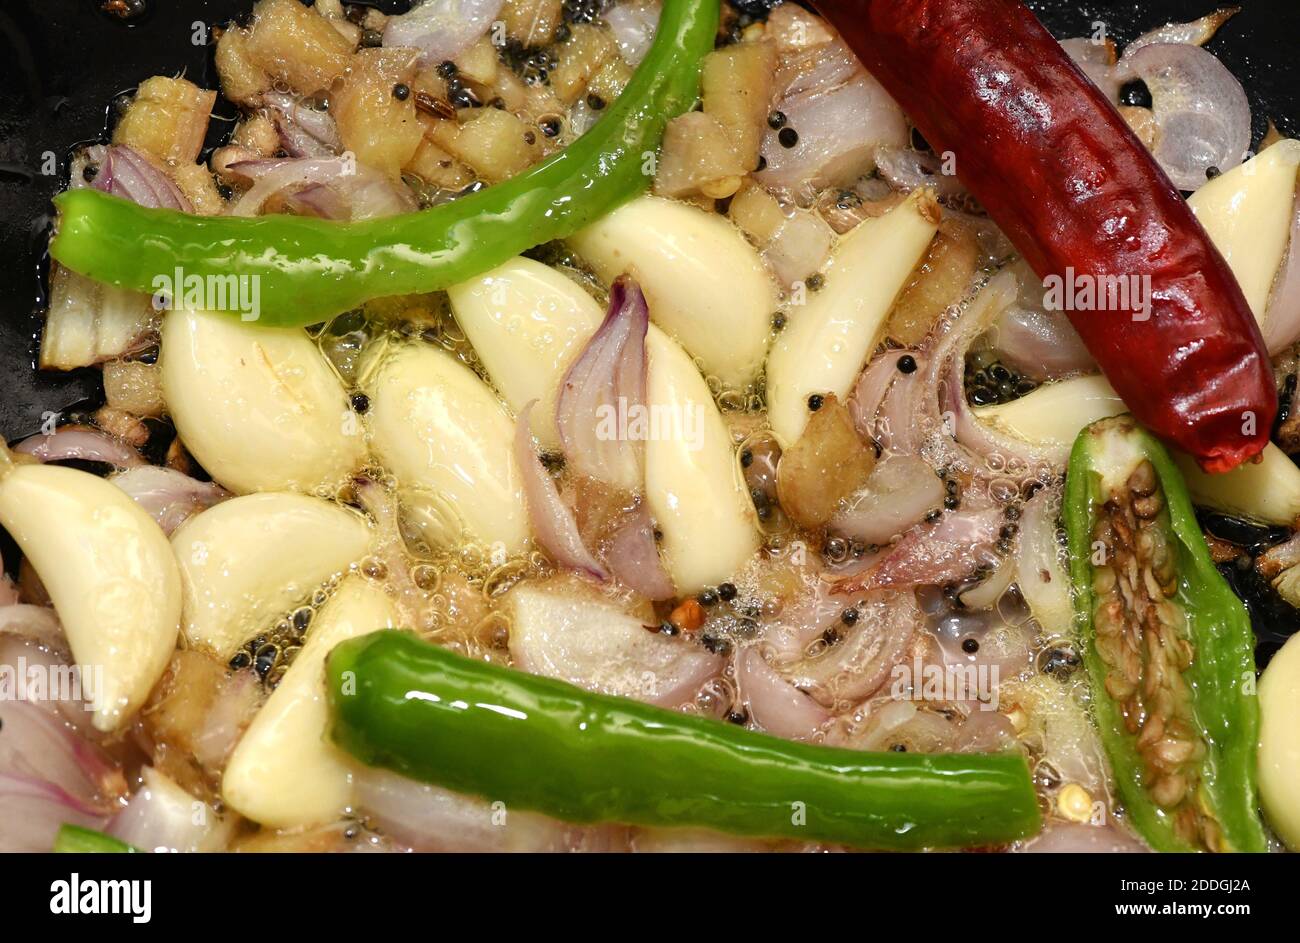 Sautéing or sautéing in a Mud Pan   Frying  garlic,turmeric,onions,green chilli and Mustard in oil in a Mud Bowl.South Indian kitchen food recipes. Stock Photo